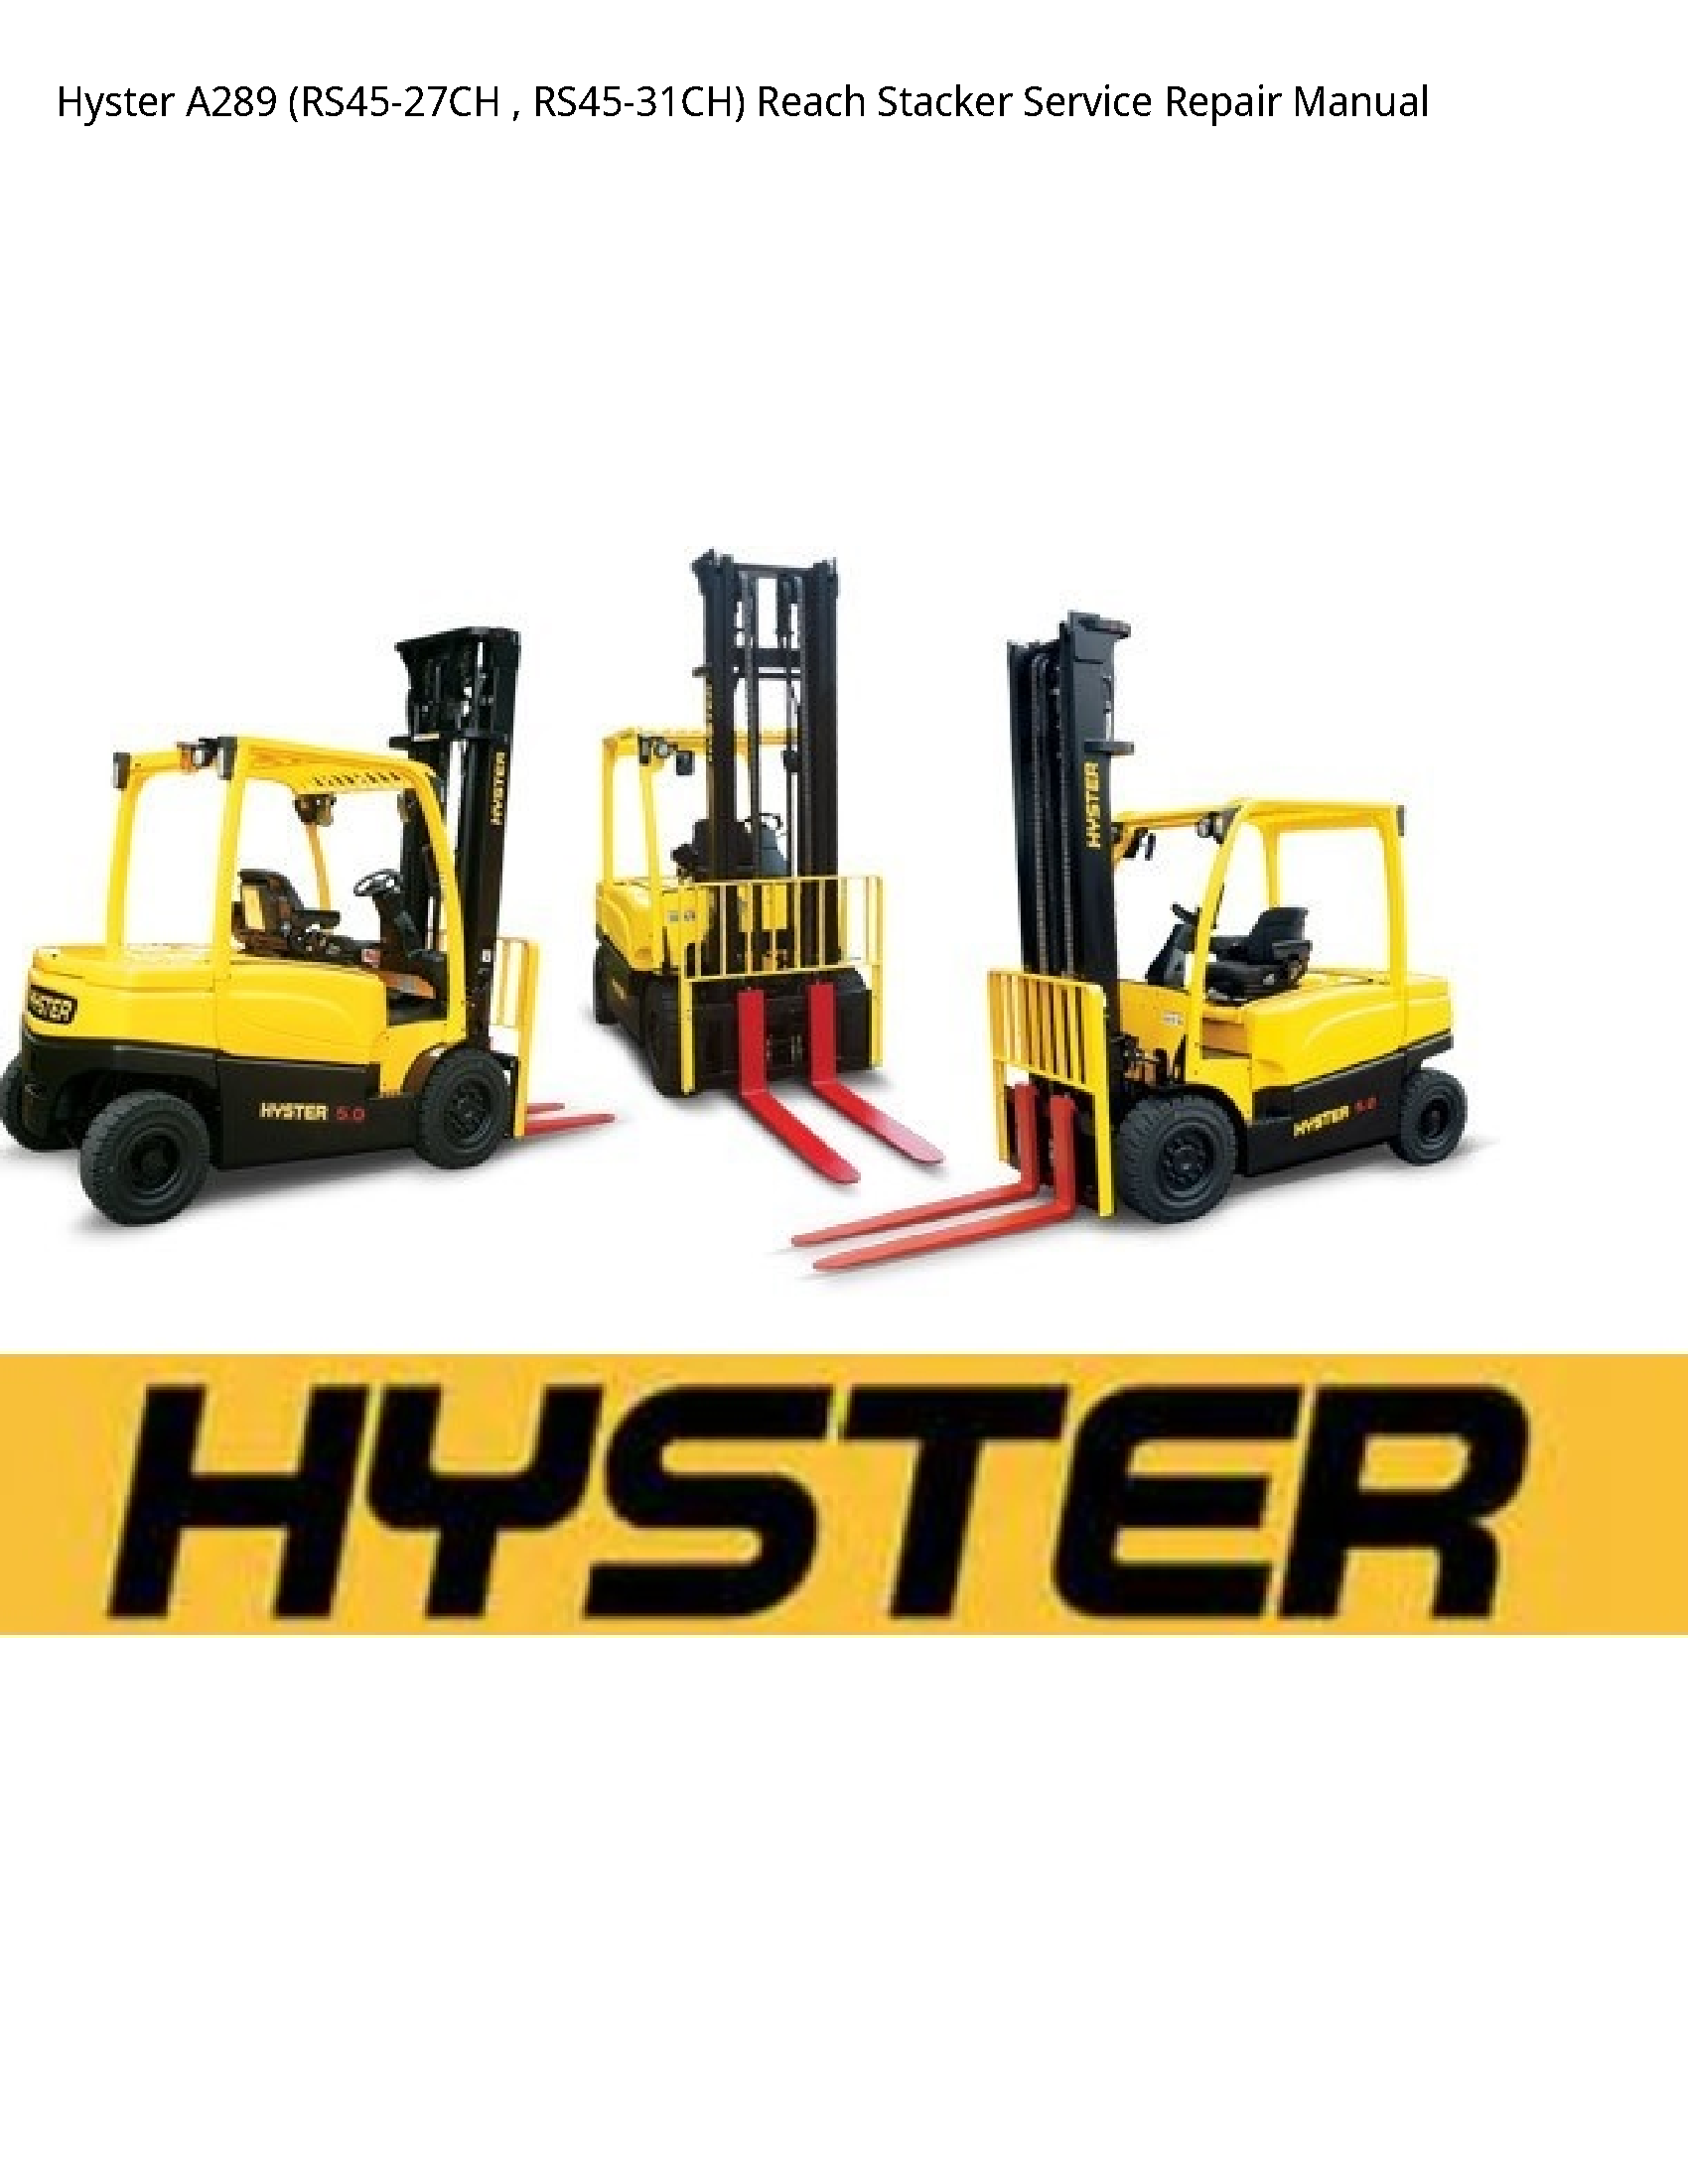 Hyster A289 Reach Stacker manual